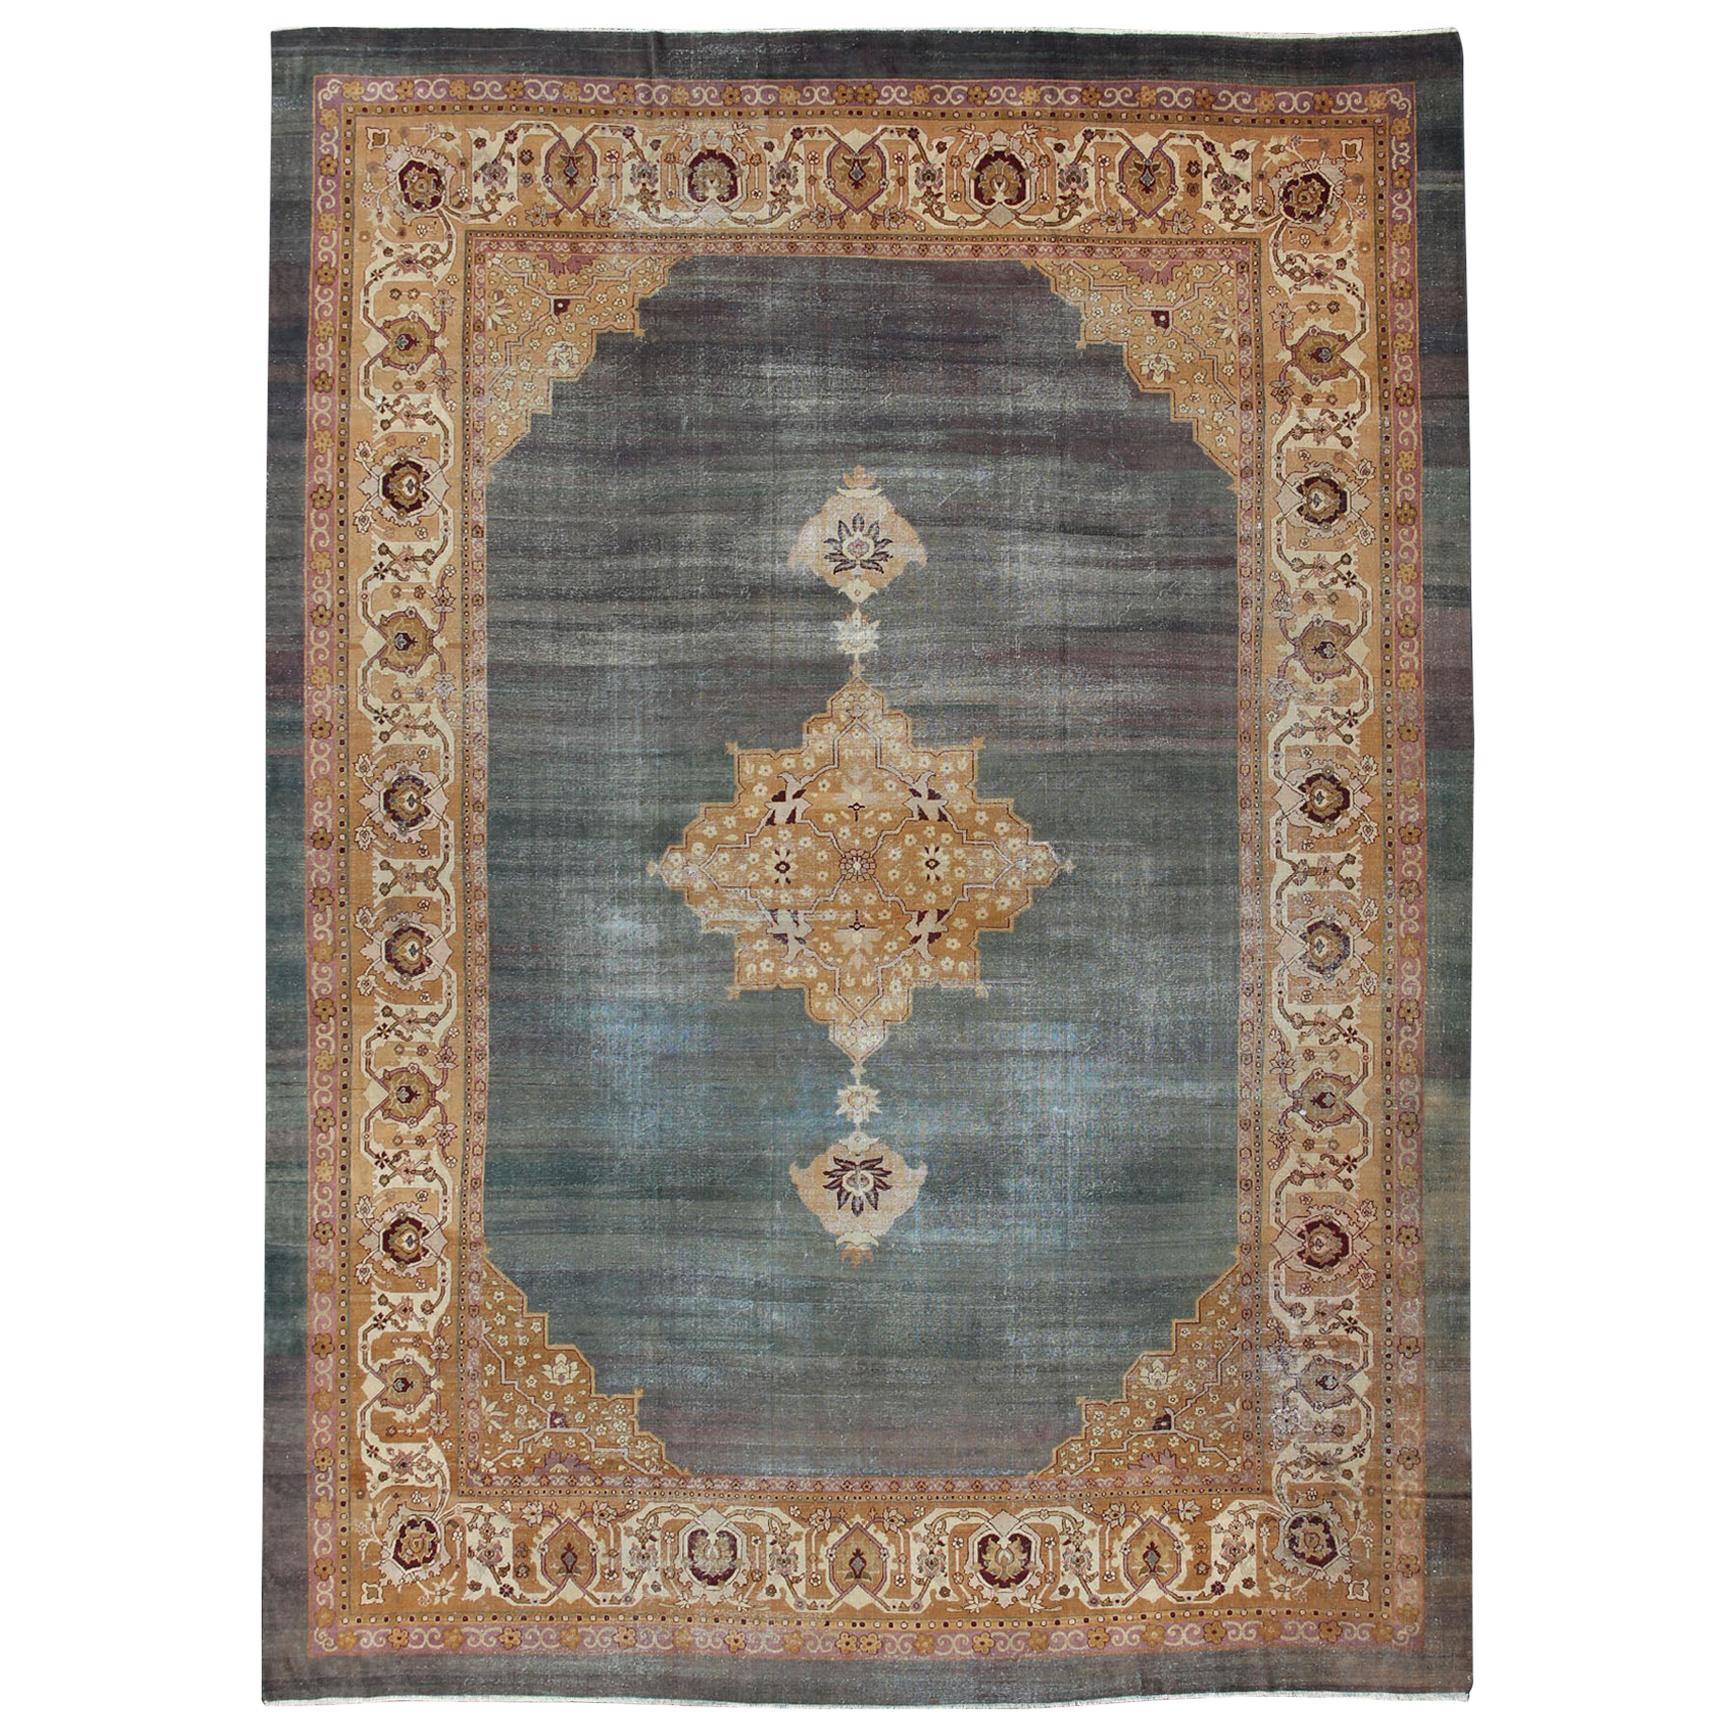 Antique Indian Agra Rug Intoxicating Blue Field and Crown Jewel Medallion For Sale